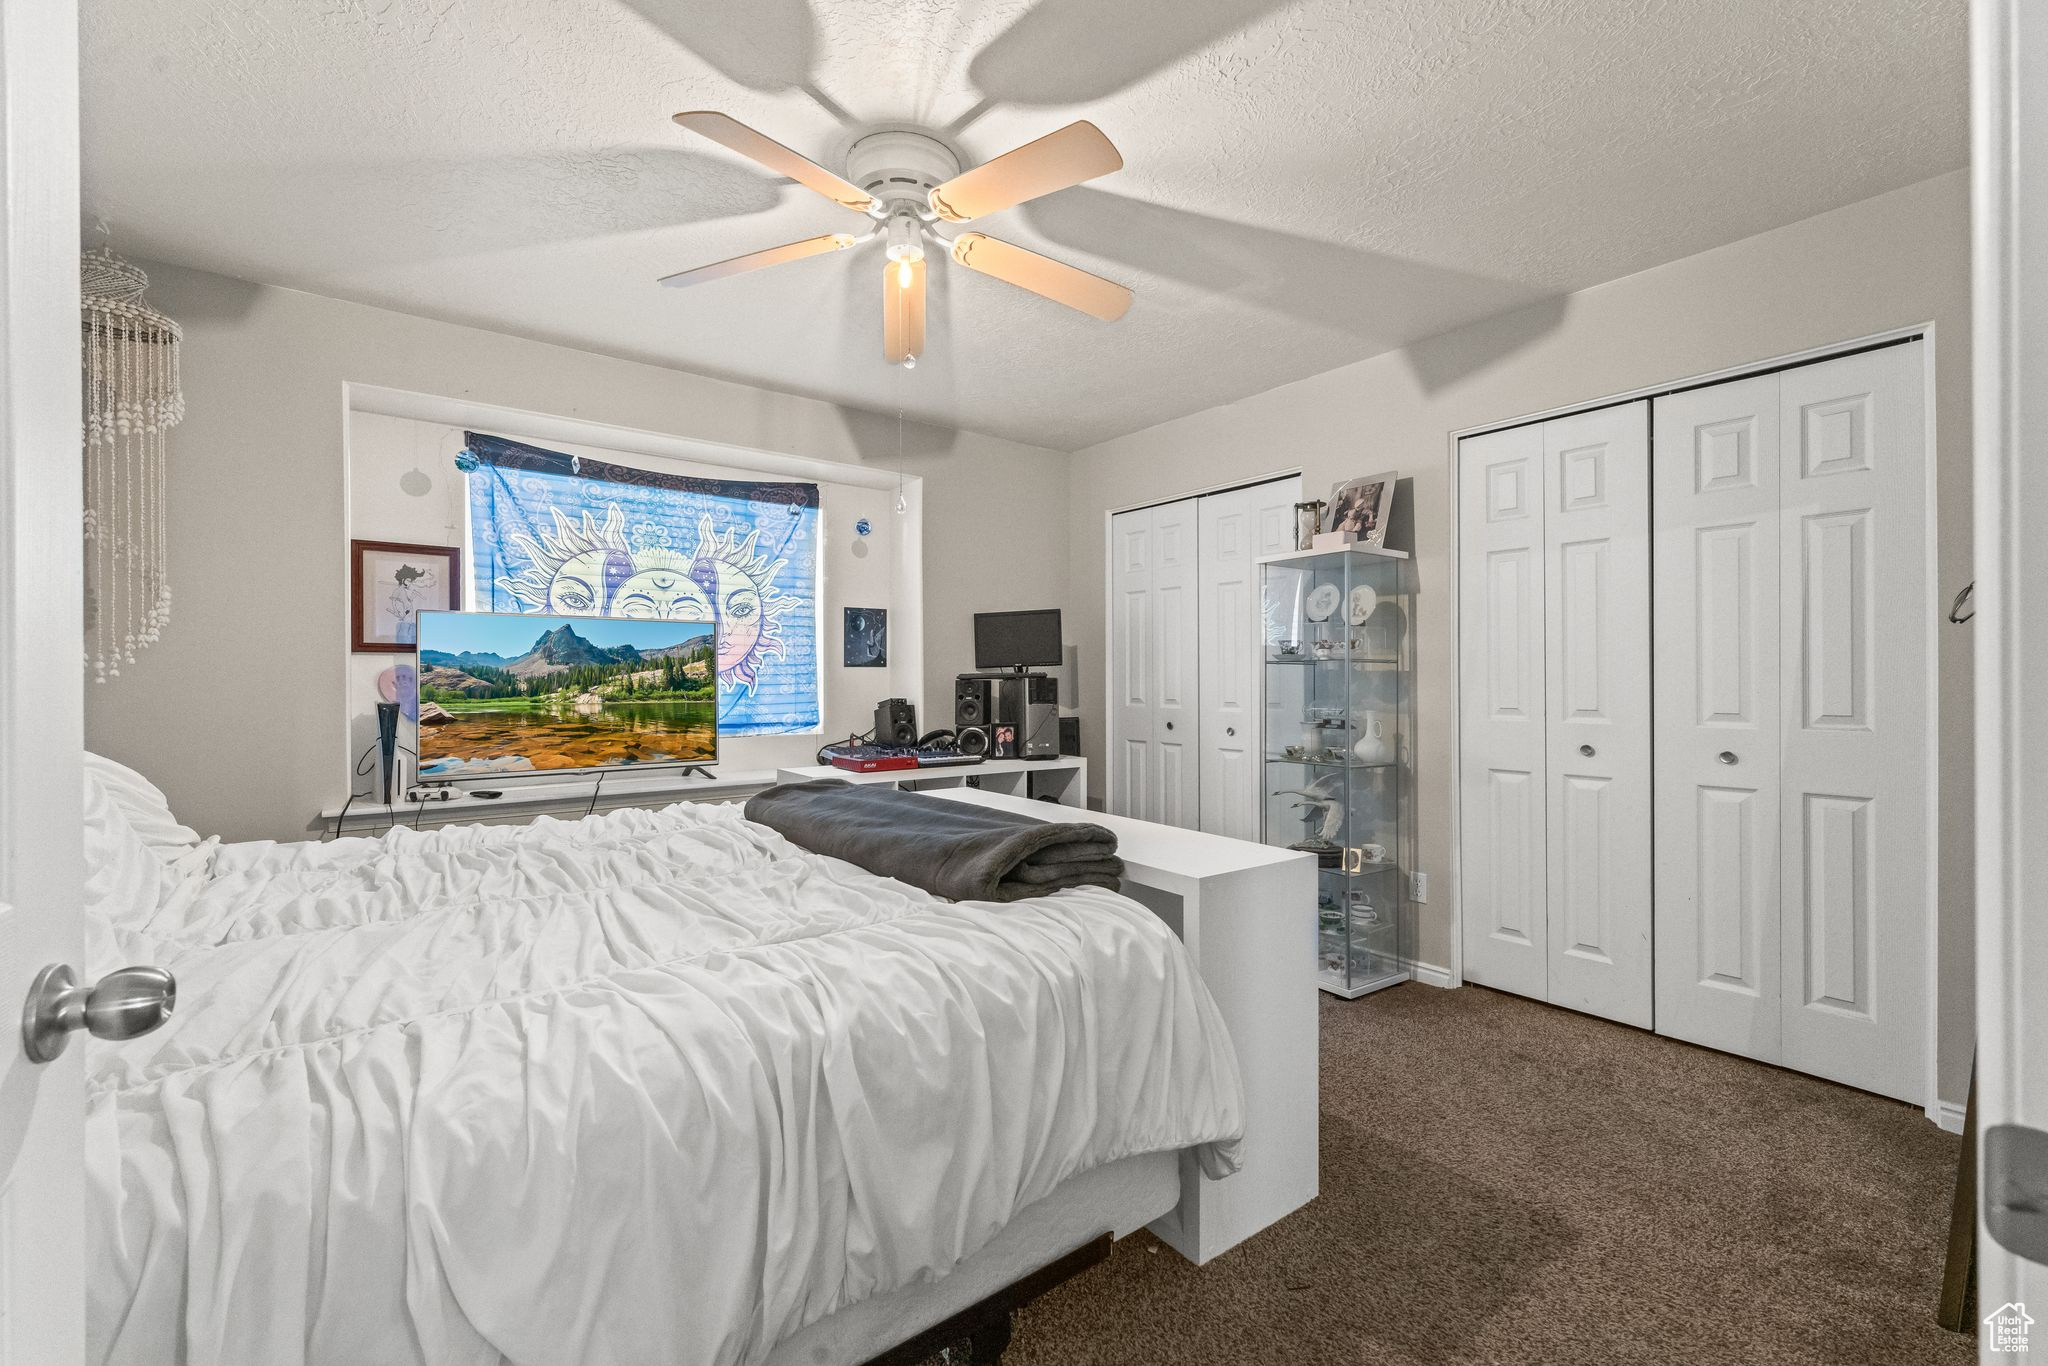 Carpeted bedroom with multiple closets, a textured ceiling, and ceiling fan